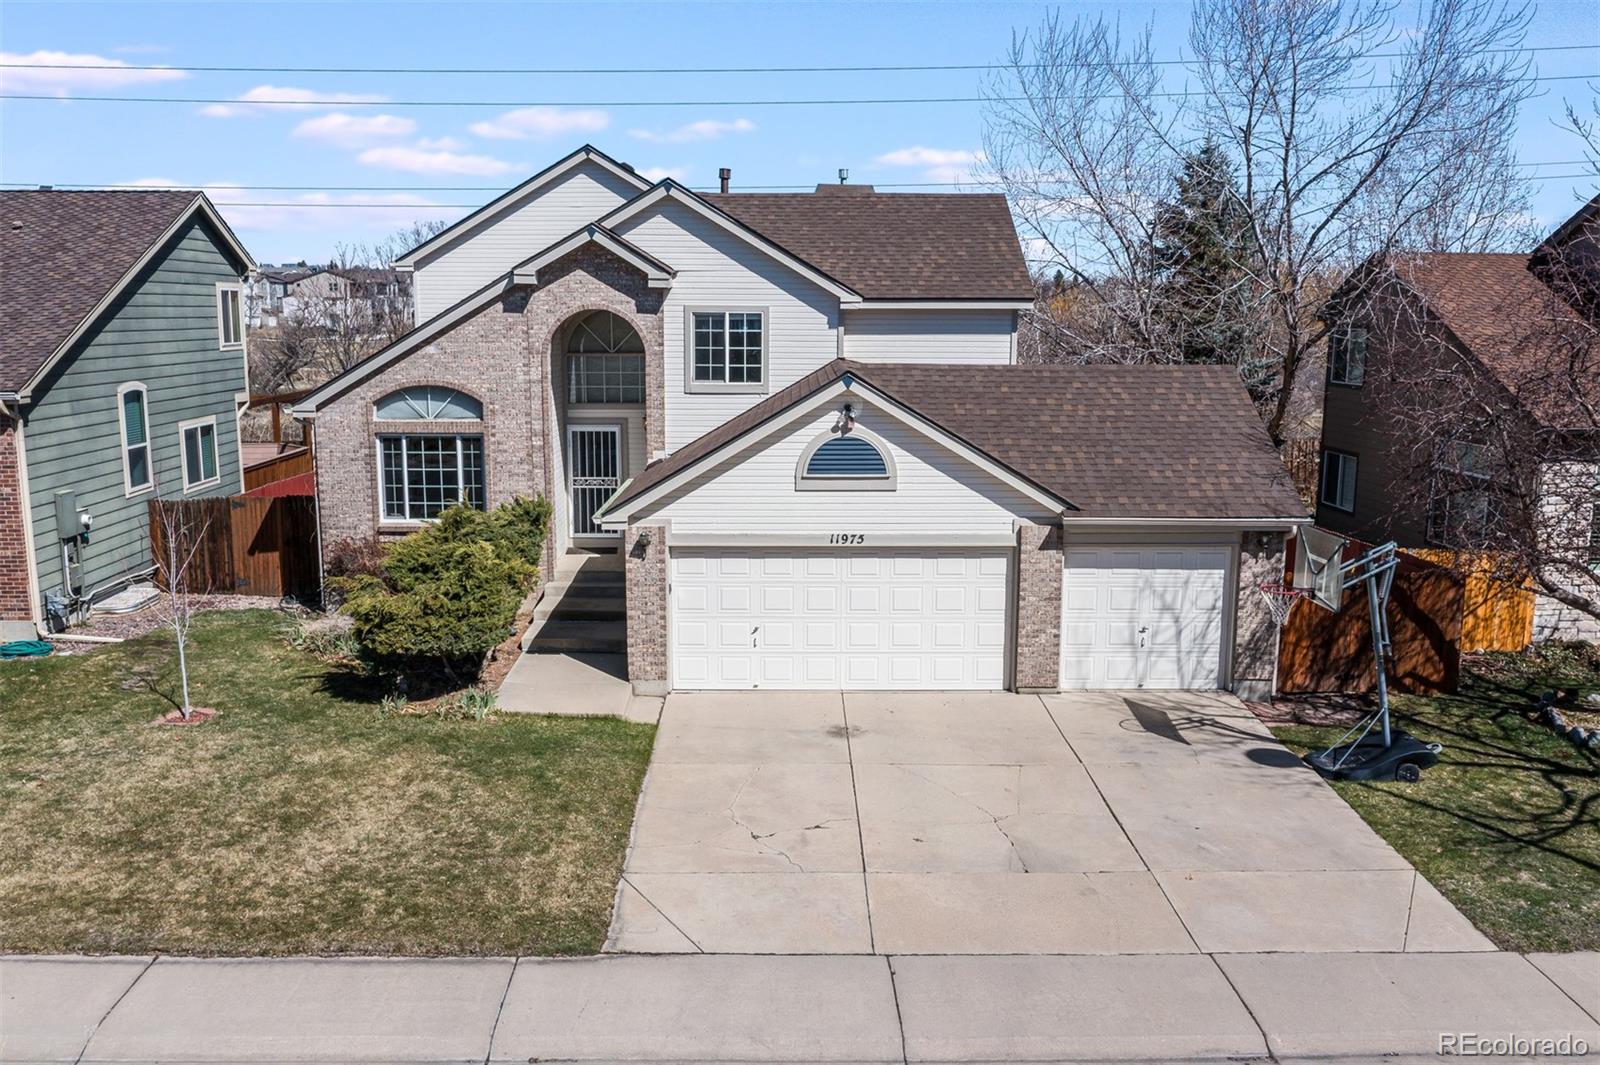 11975 W 56th Drive, arvada MLS: 6095332 Beds: 4 Baths: 3 Price: $755,000